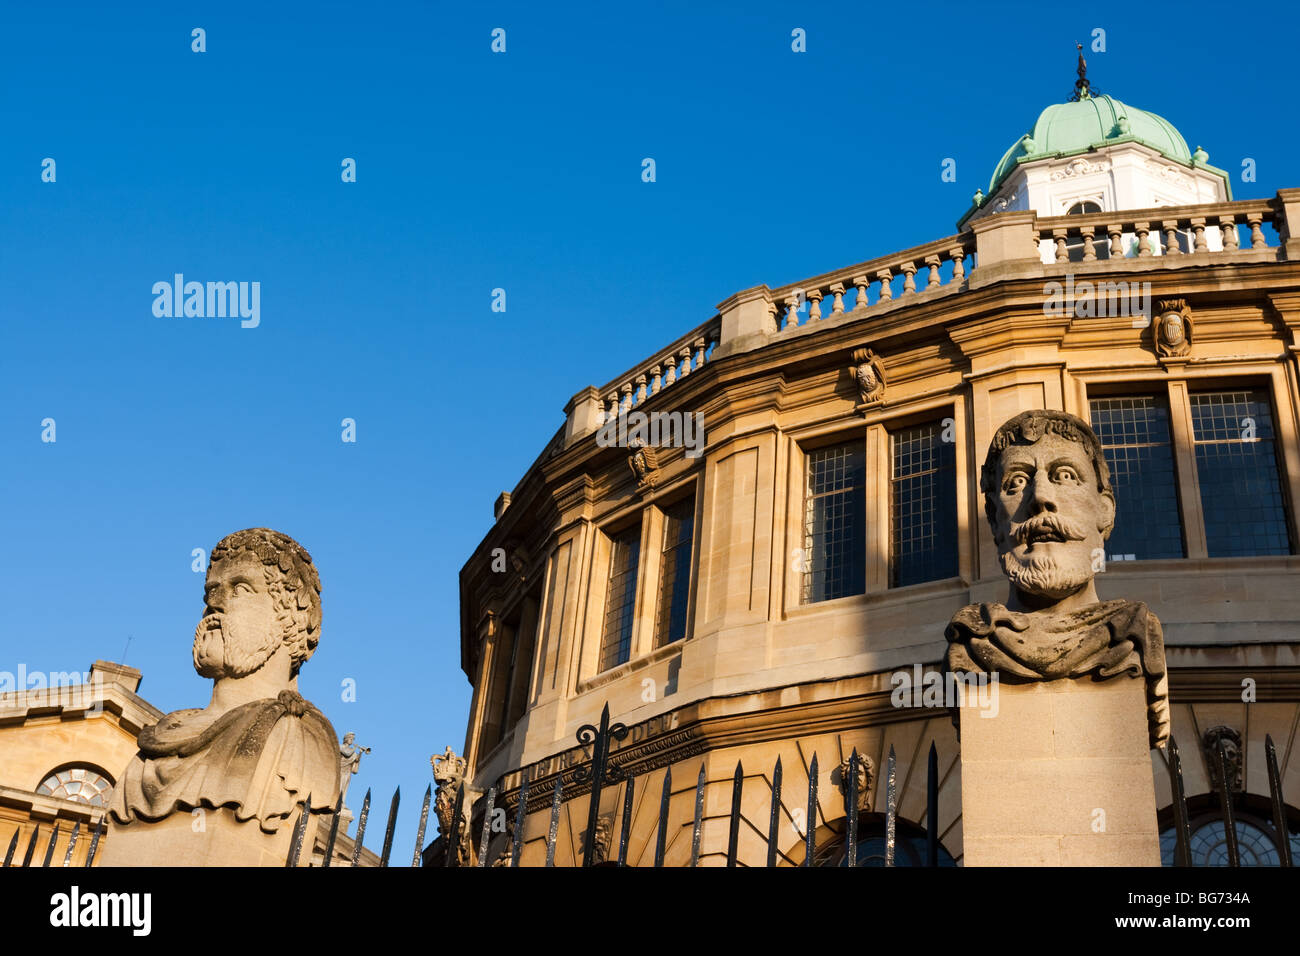 Le Sheldonian Theatre. Oxford, Angleterre Banque D'Images